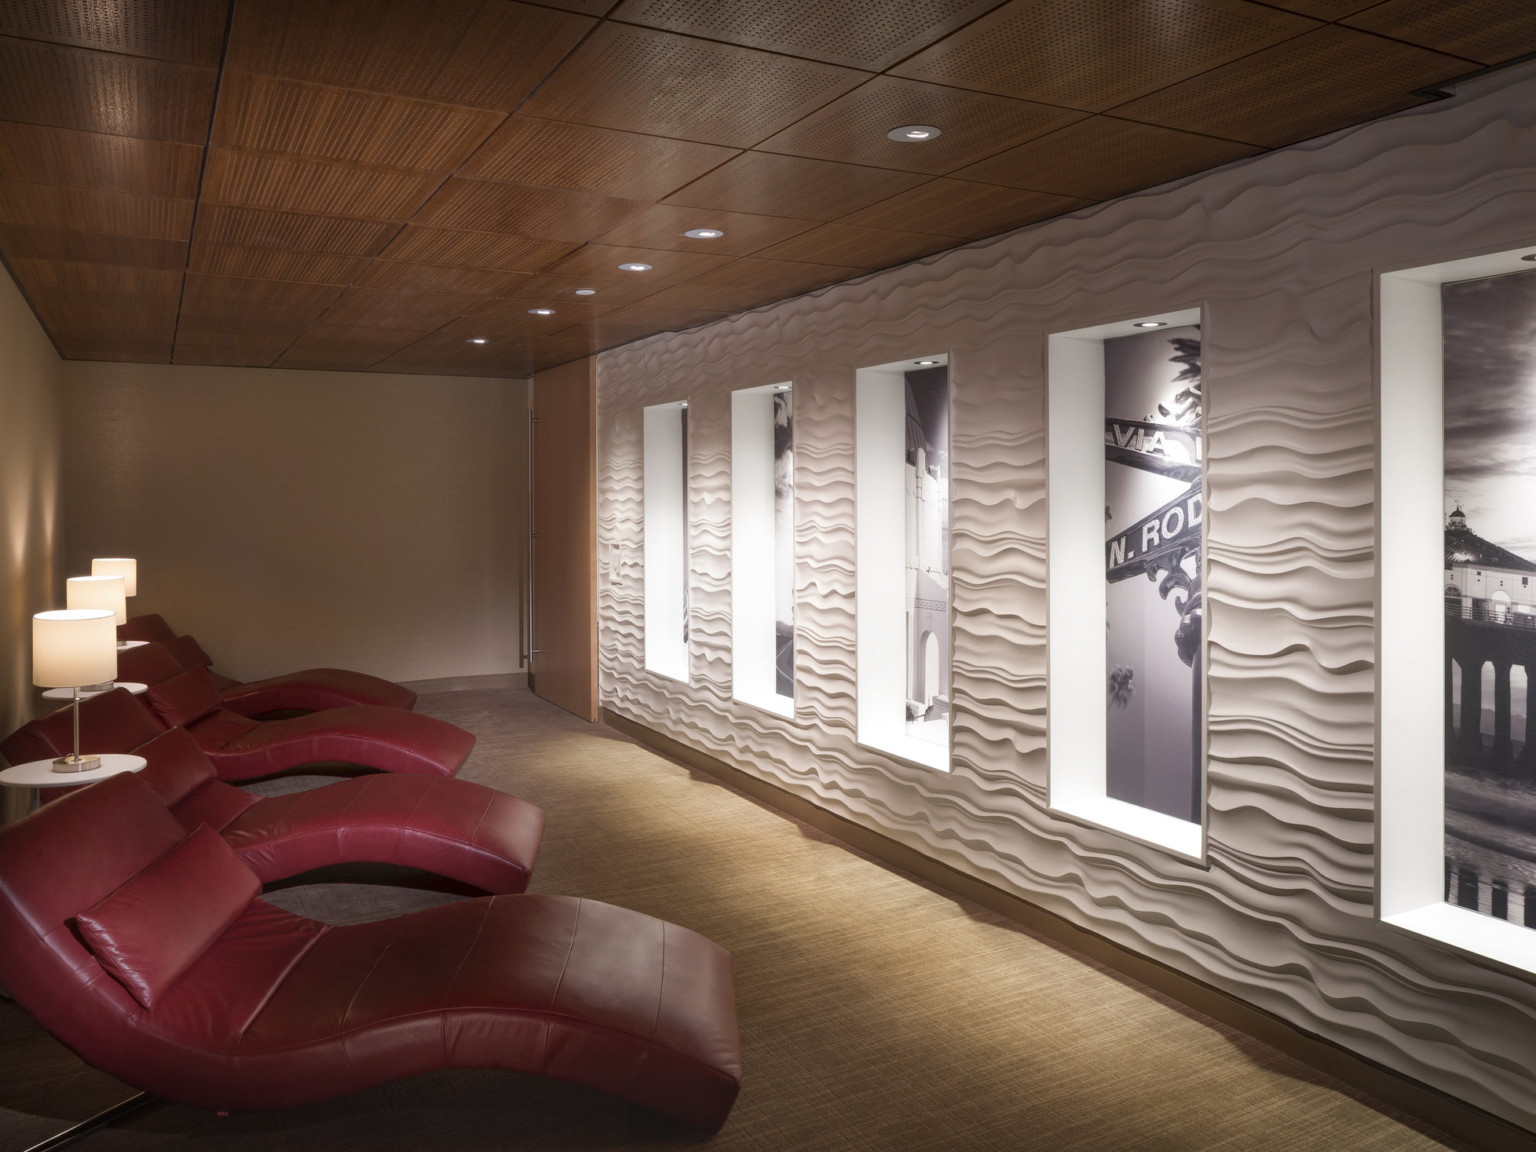 red reclining chairs in a healing spa room with black and white artwork and wood ceilings